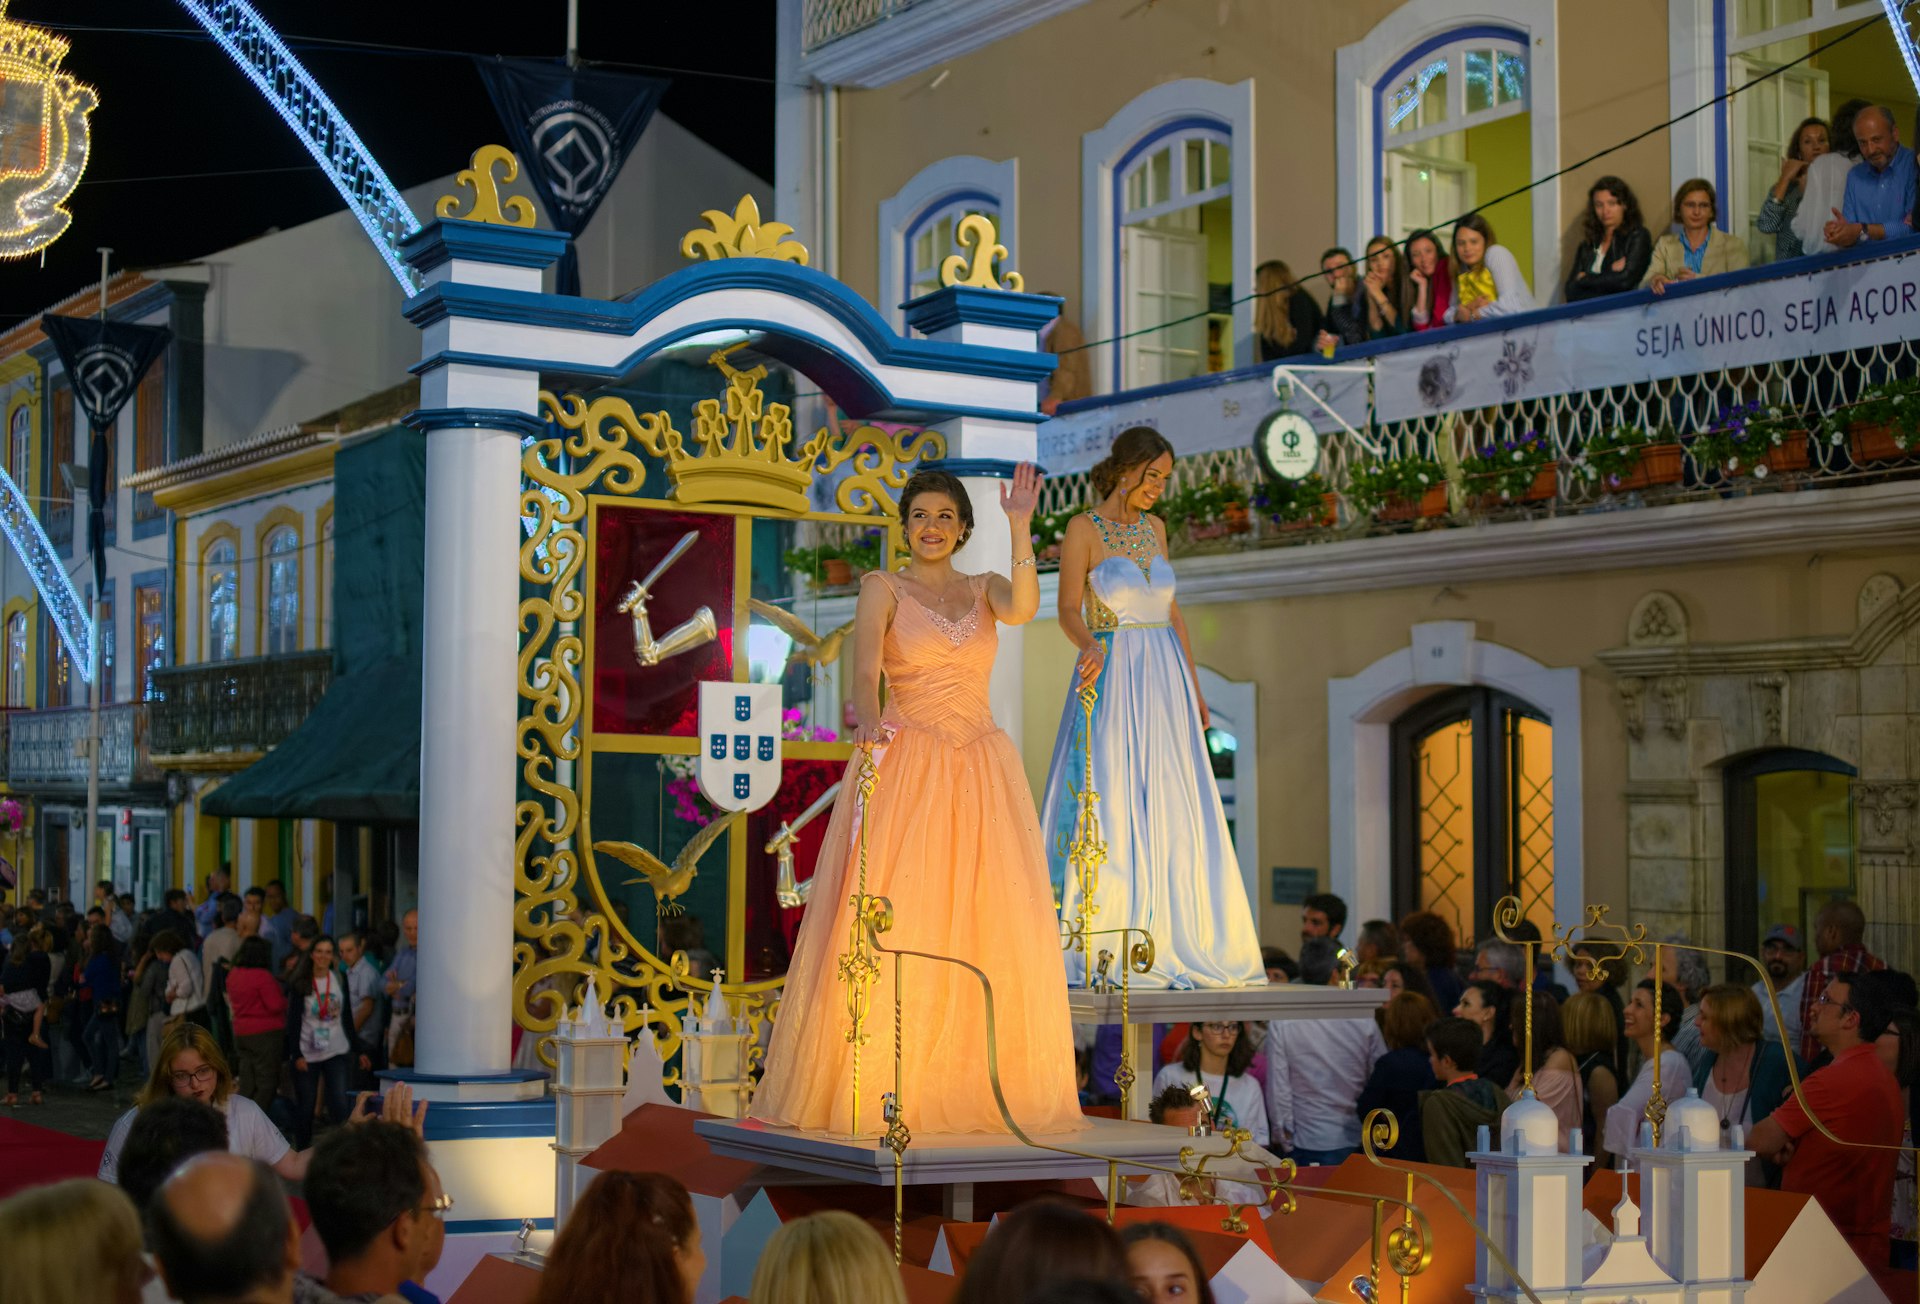 Crowds are watching as two women dressed in period gowns stand on a float during a parade through the streets of Angra do Heroismo, Terceira, for the Sanjoaninas festivities.